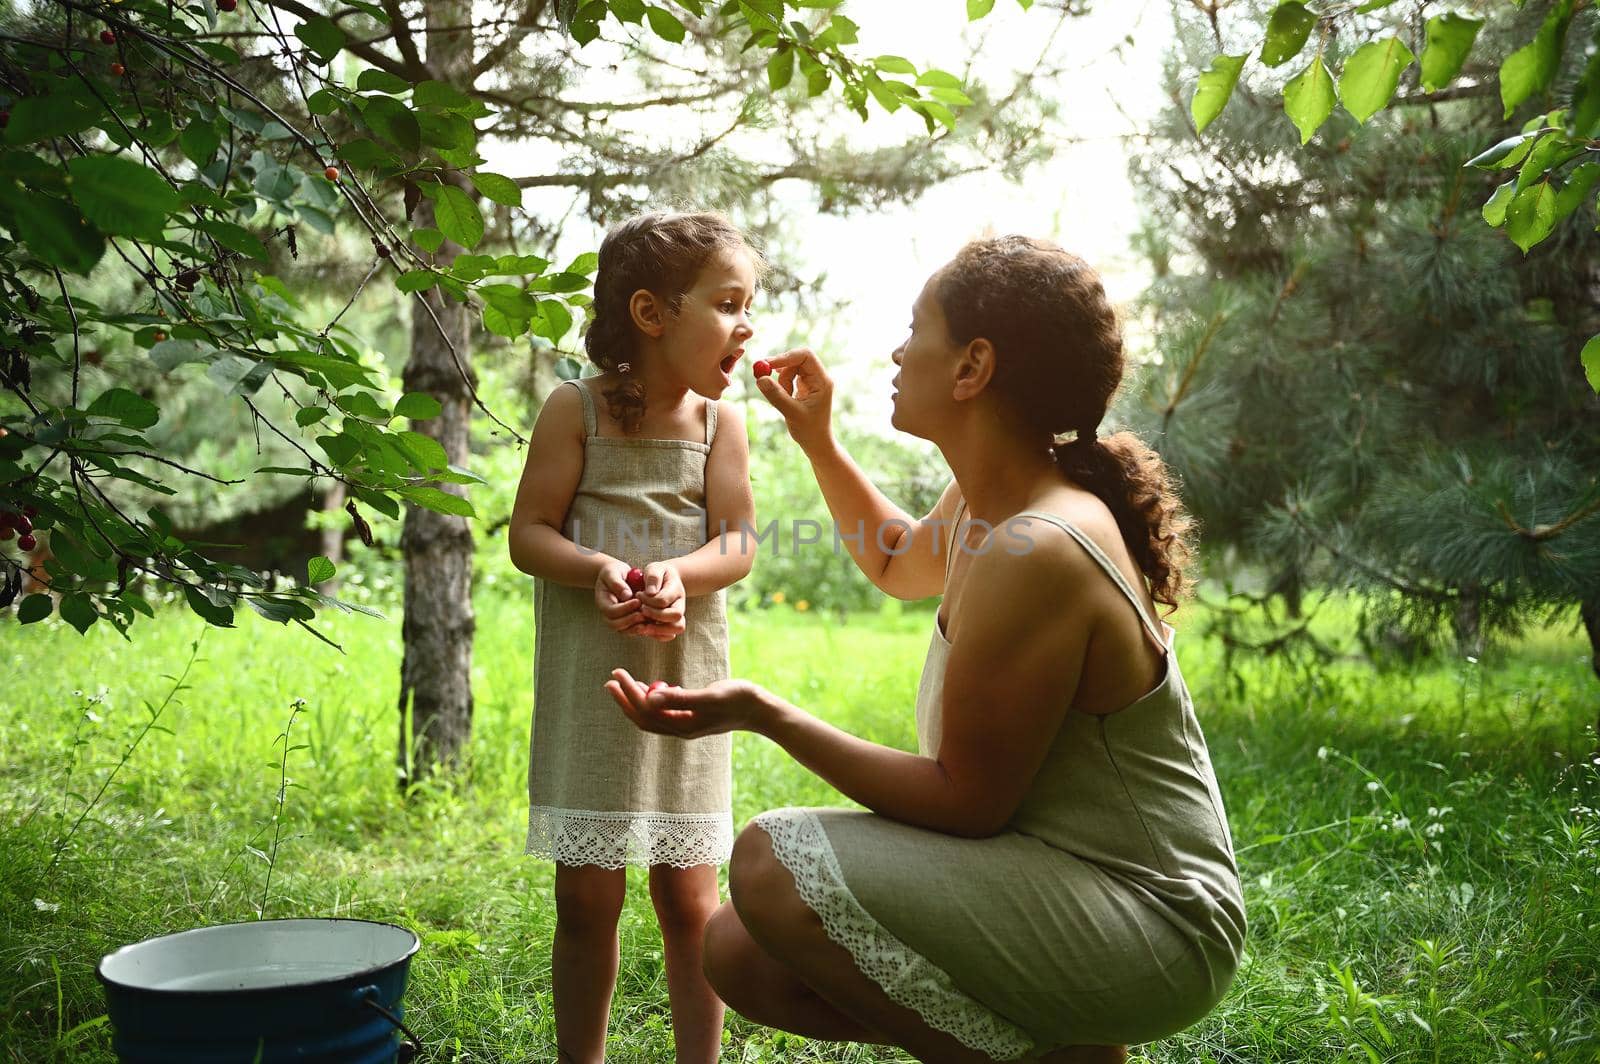 Adorable mother feeds her daughter with plucked cherries in the garden. Mom and daughter dress the same when picking cherries in summer. Motherhood, childhood, family relationships.